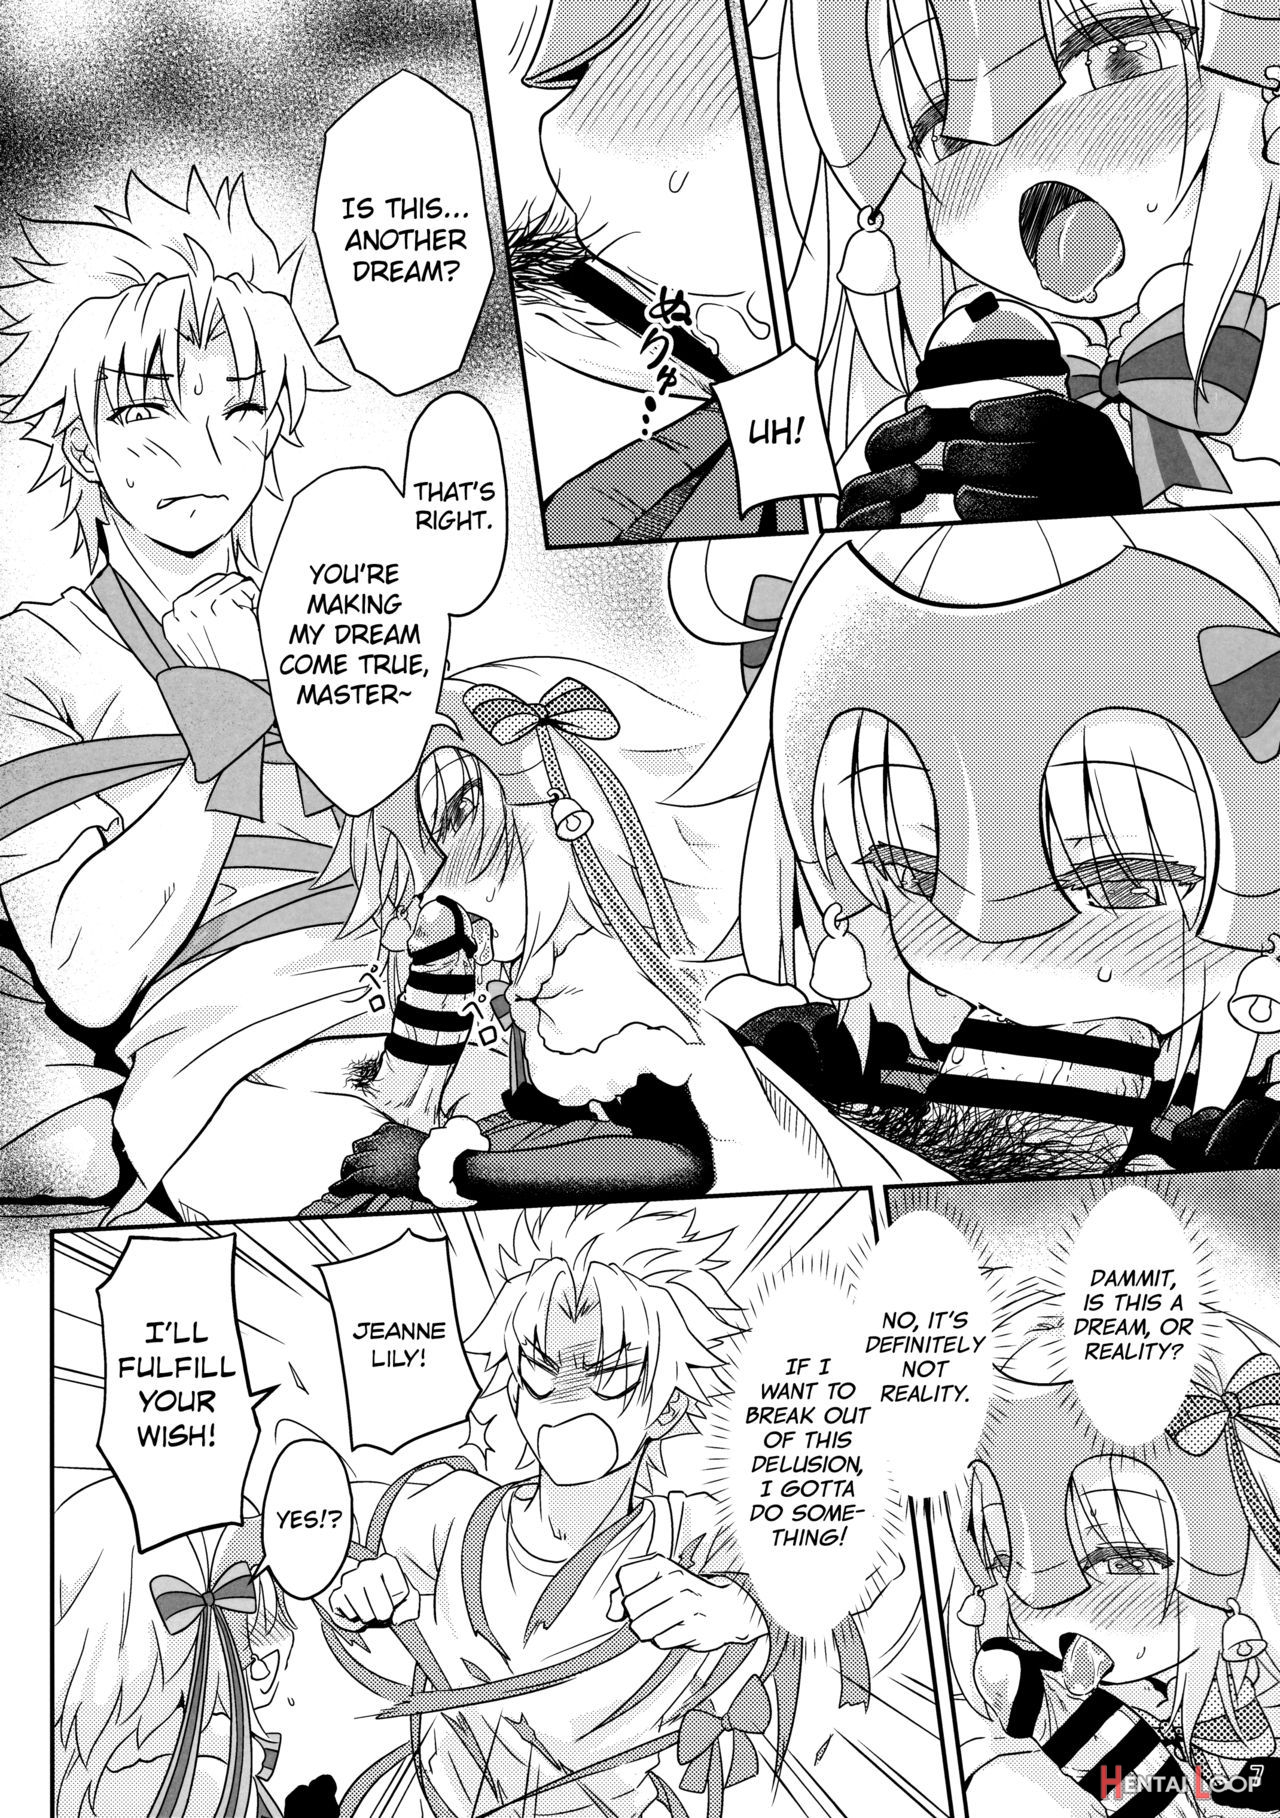 Jeanne Lily Is A Good Girl? page 8